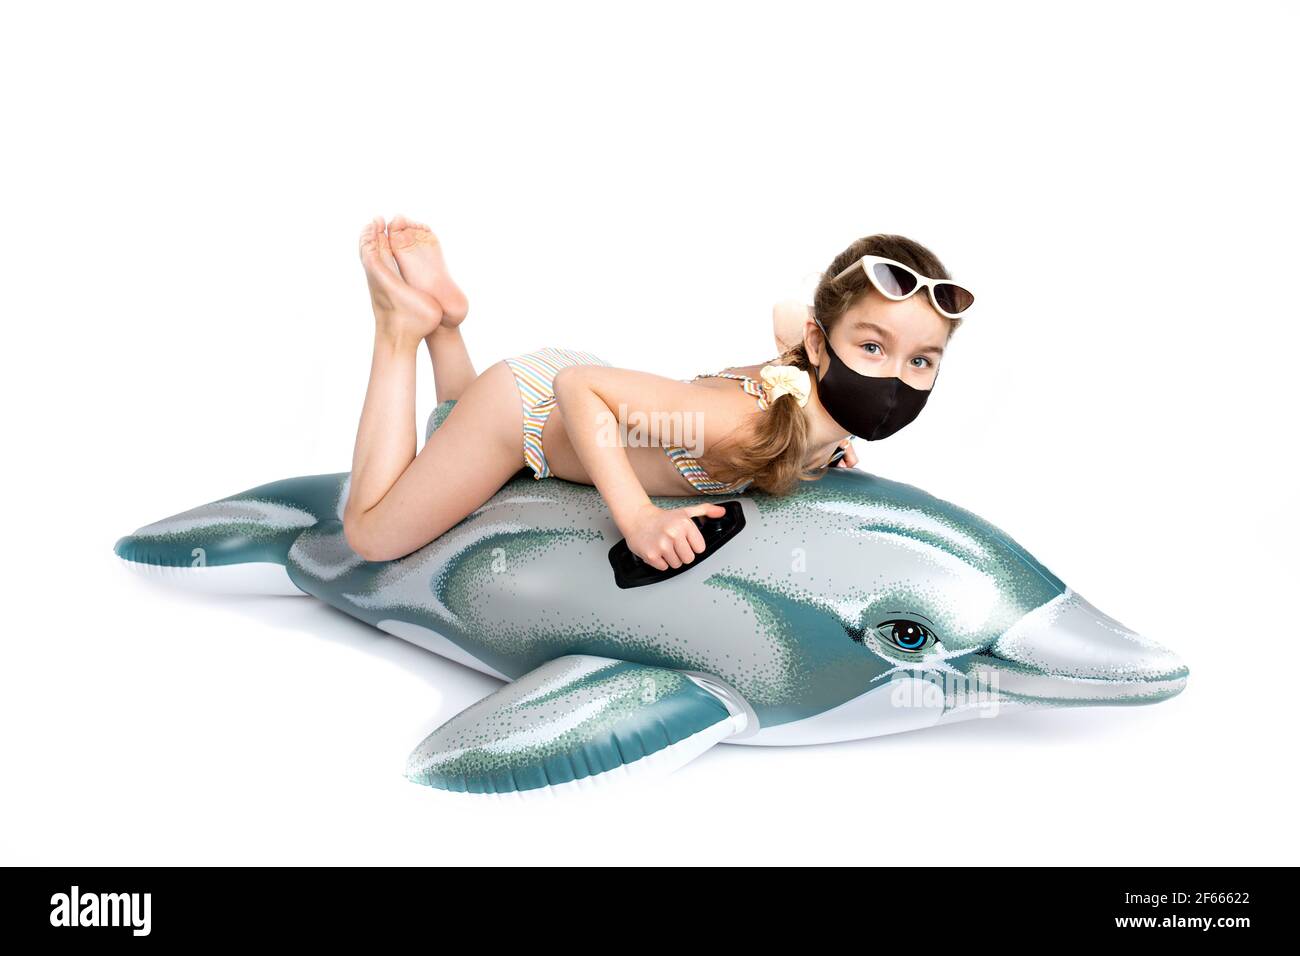 Child in a medical mask covid19 in a bathing suit on an inflatable dolphin. Studio photography on a white background.  Stock Photo